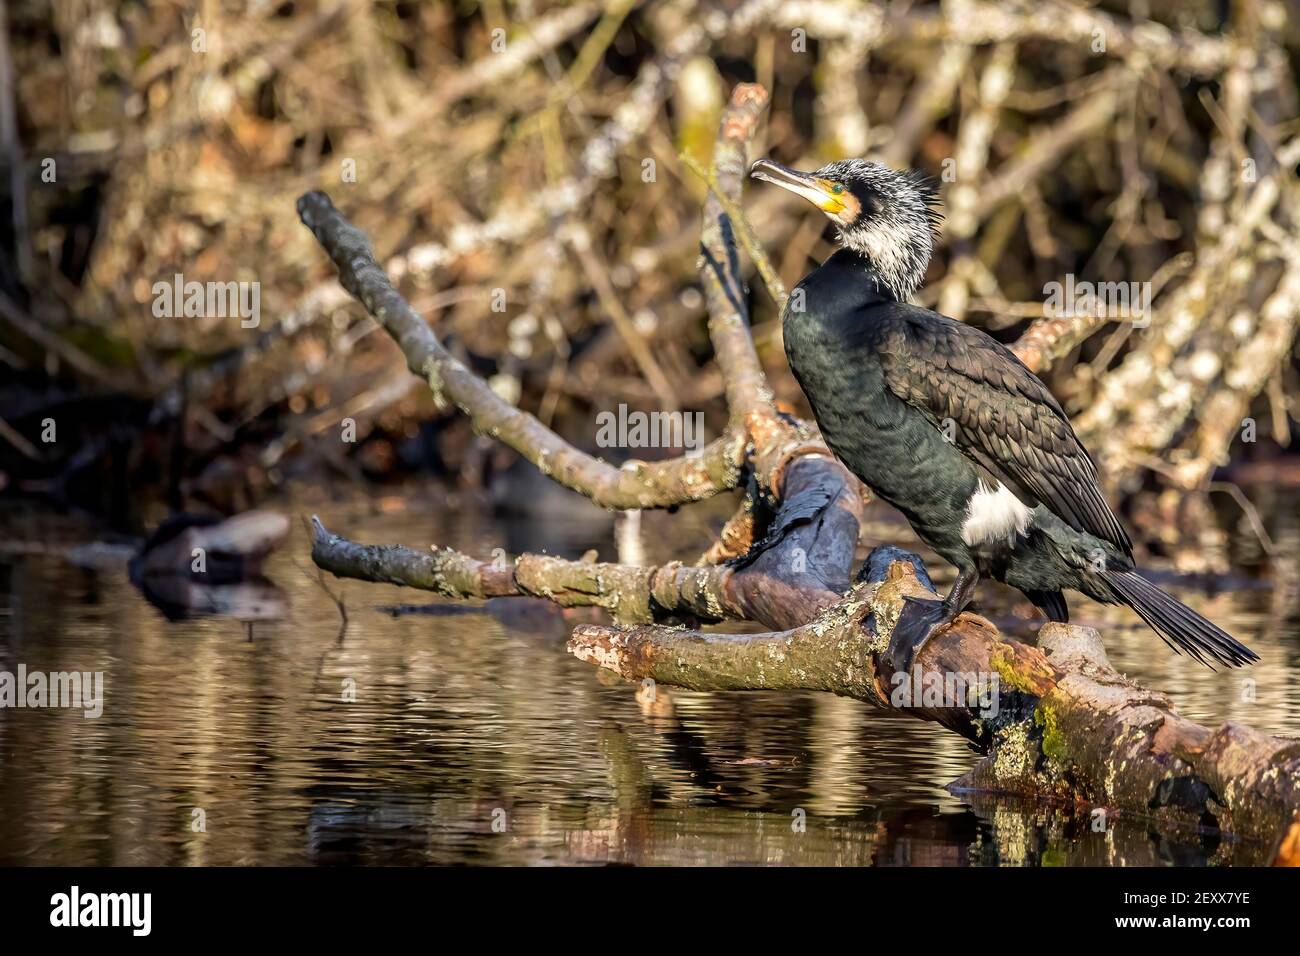 A great black cormorant sitting on a tree in a pond called Jacobiweiher next to Frankfurt, Germany at a sunny evening in winter. Stock Photo